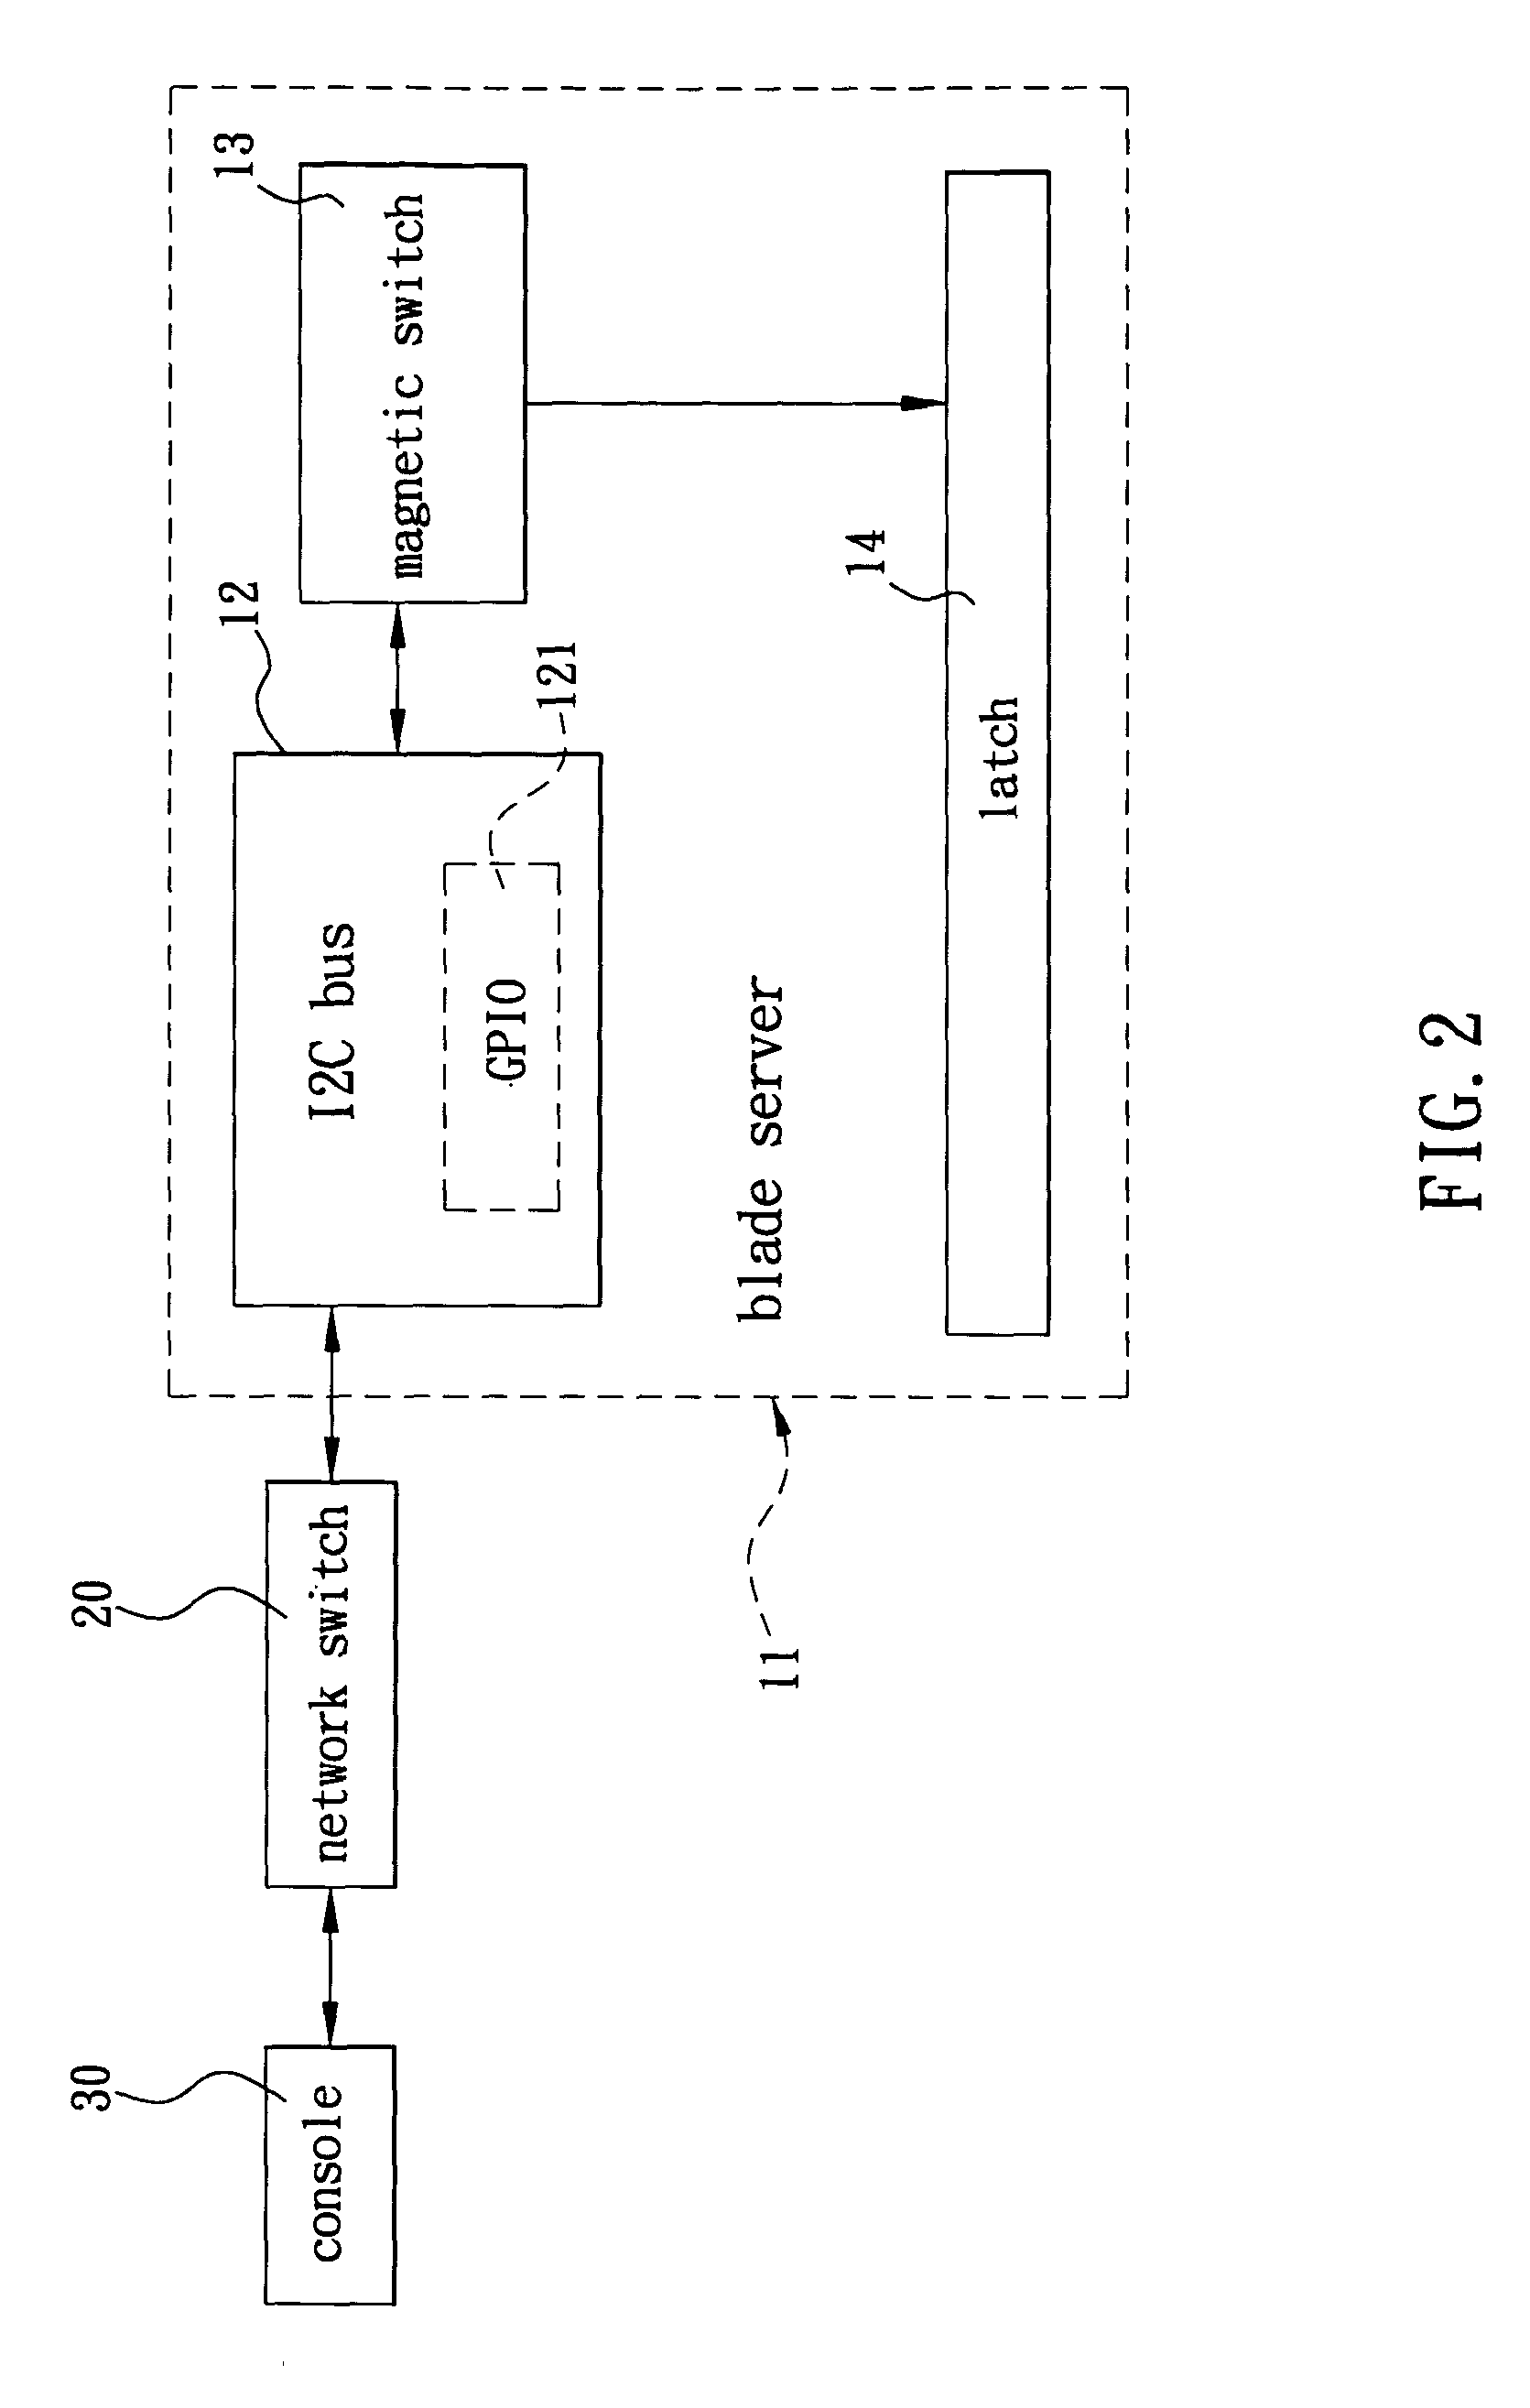 Method of tripping blade server by running from a remote console